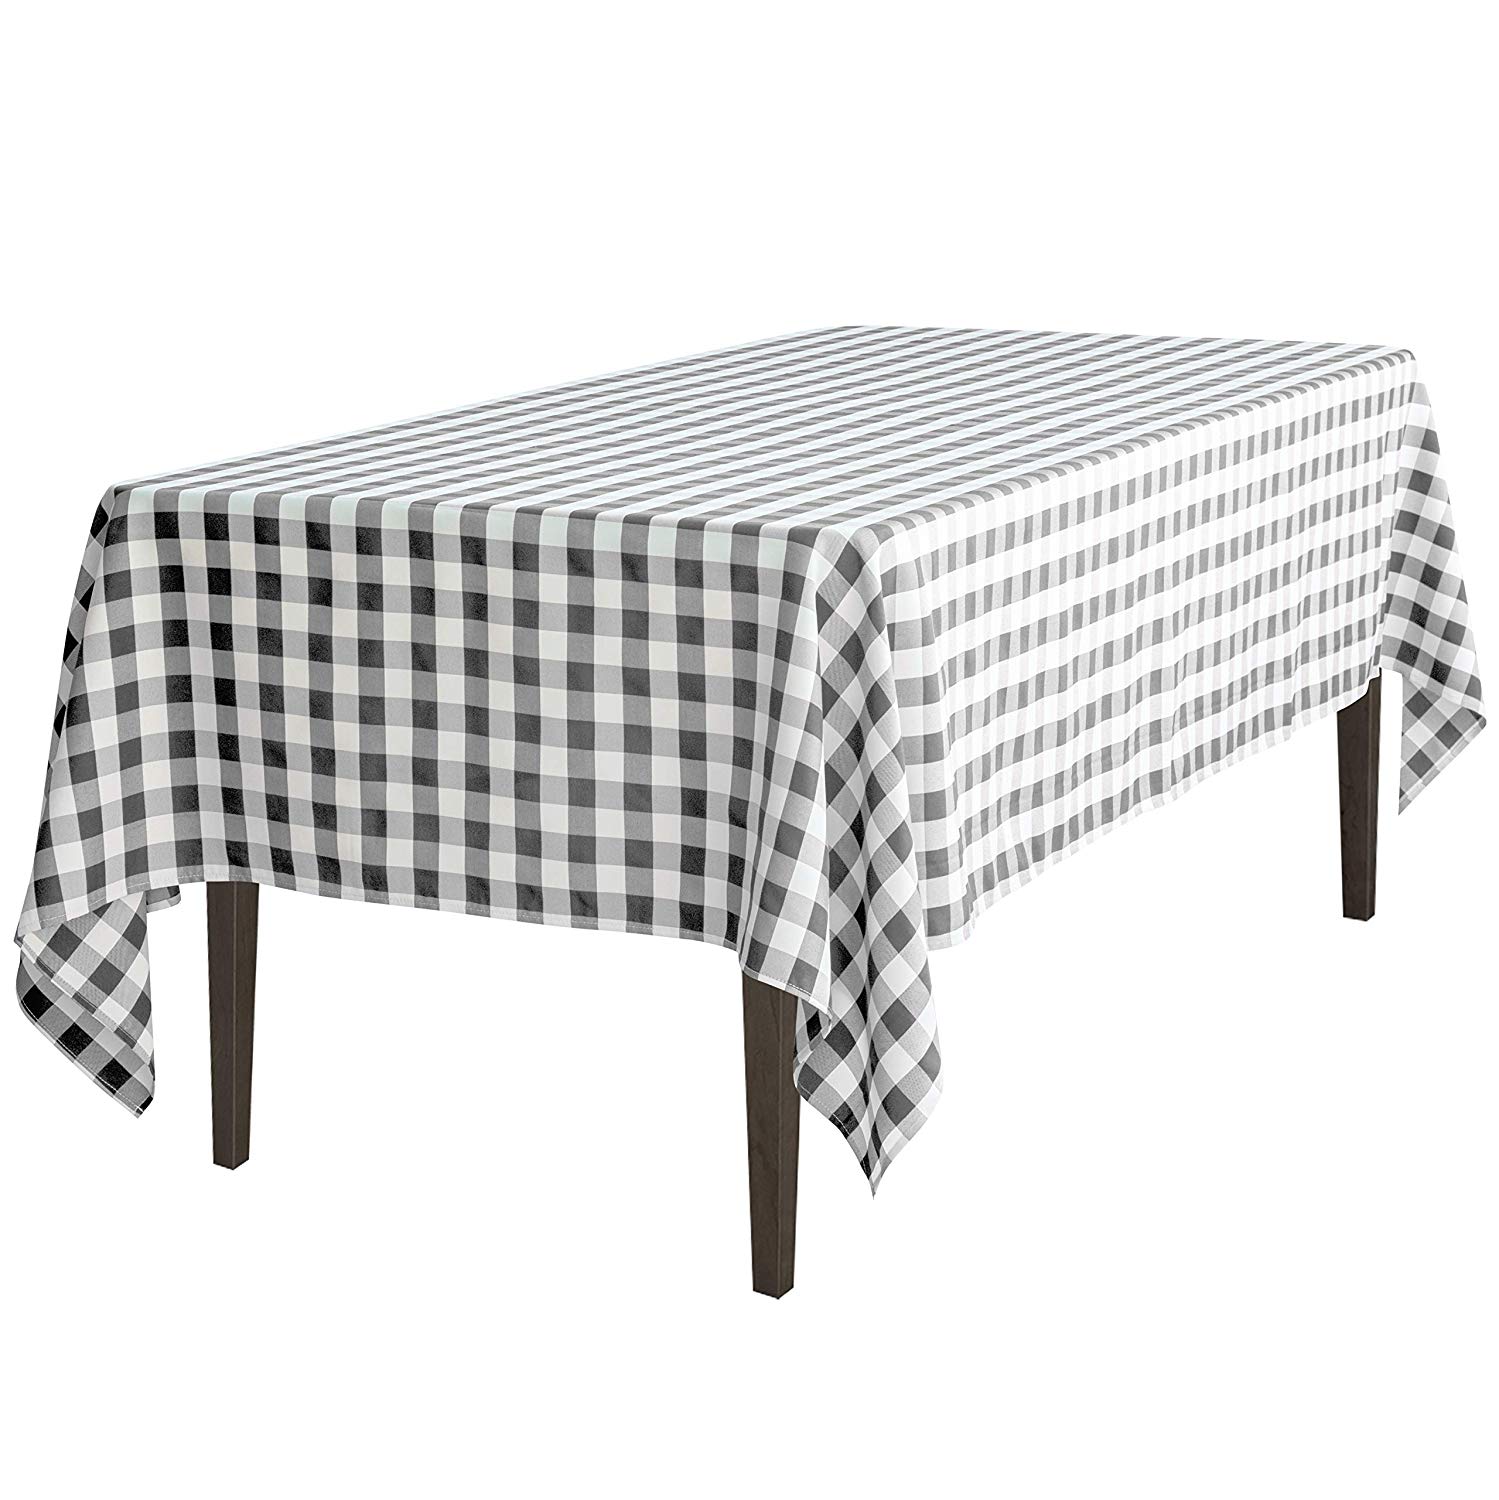 rectangular tablecloth black white small accent table cloth checker home kitchen simple console percussion box gold copper round dark wood end teal accents circular patio